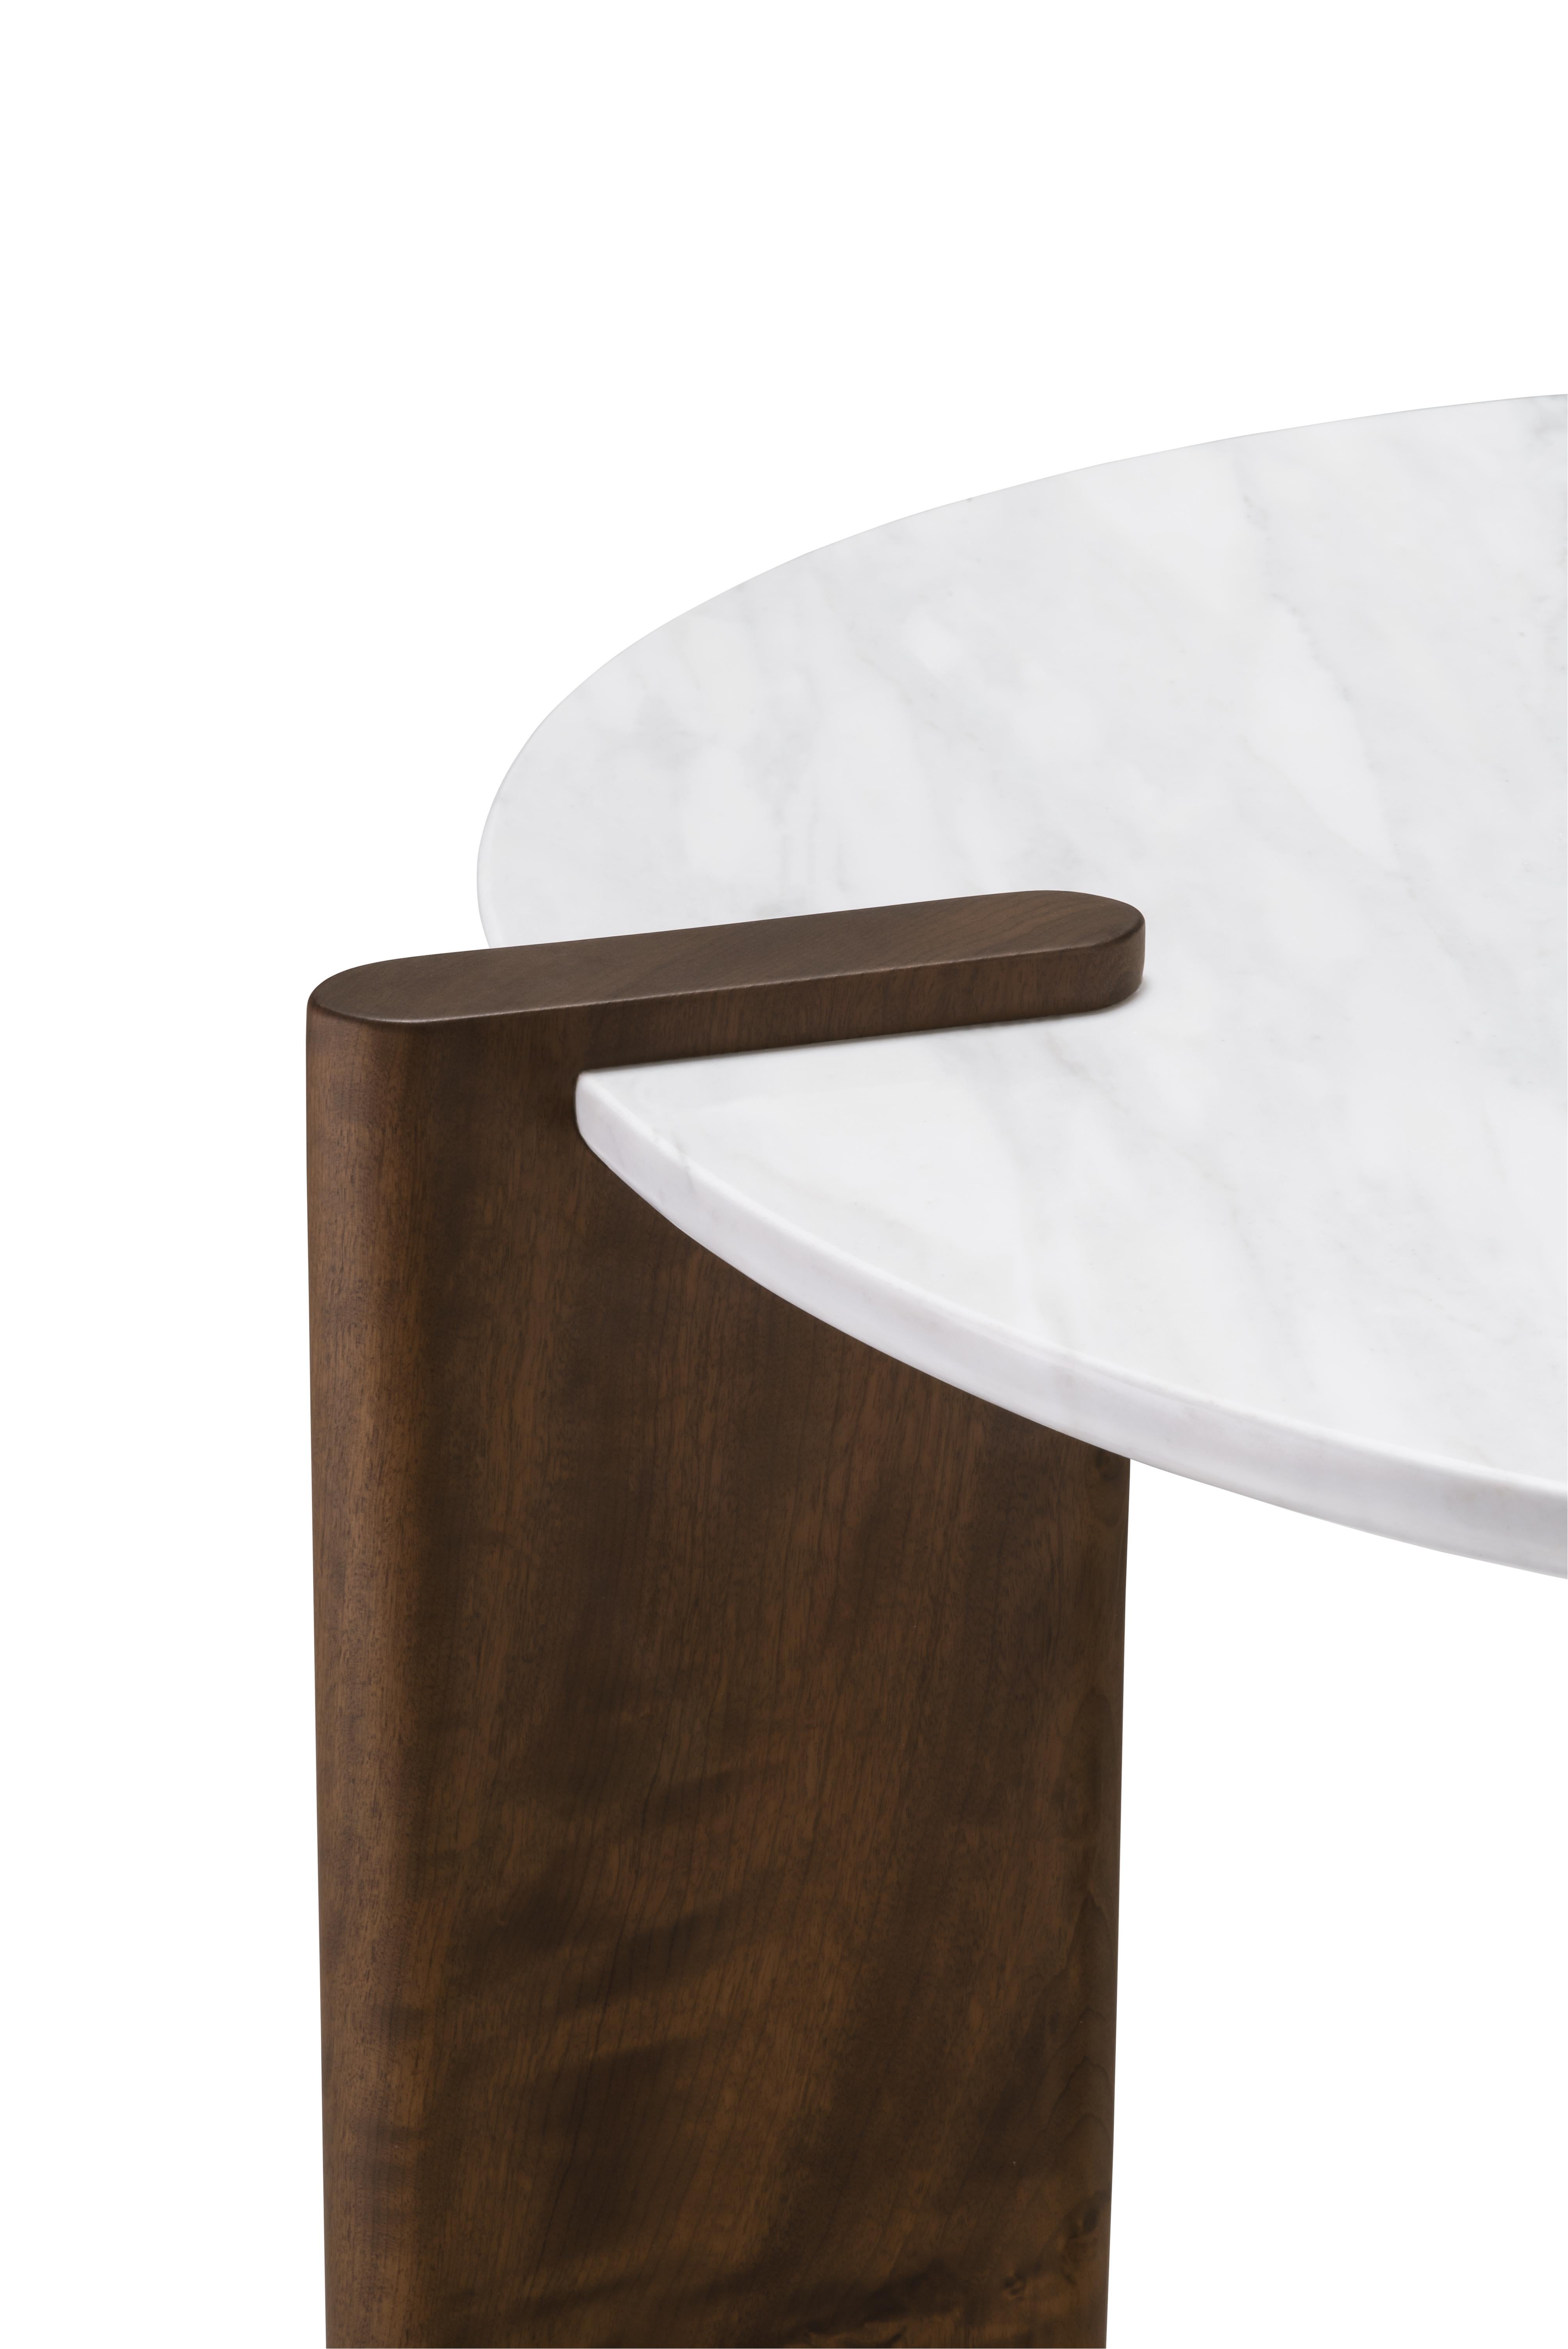 Giraffe side table by Juliana Lima Vasconcellos with Italian Carrara marble top and three feet in solid walnut or solid imbuia. With a simplified and light language, its forms comes with curves and smoothness in the wood and in the marble finish.